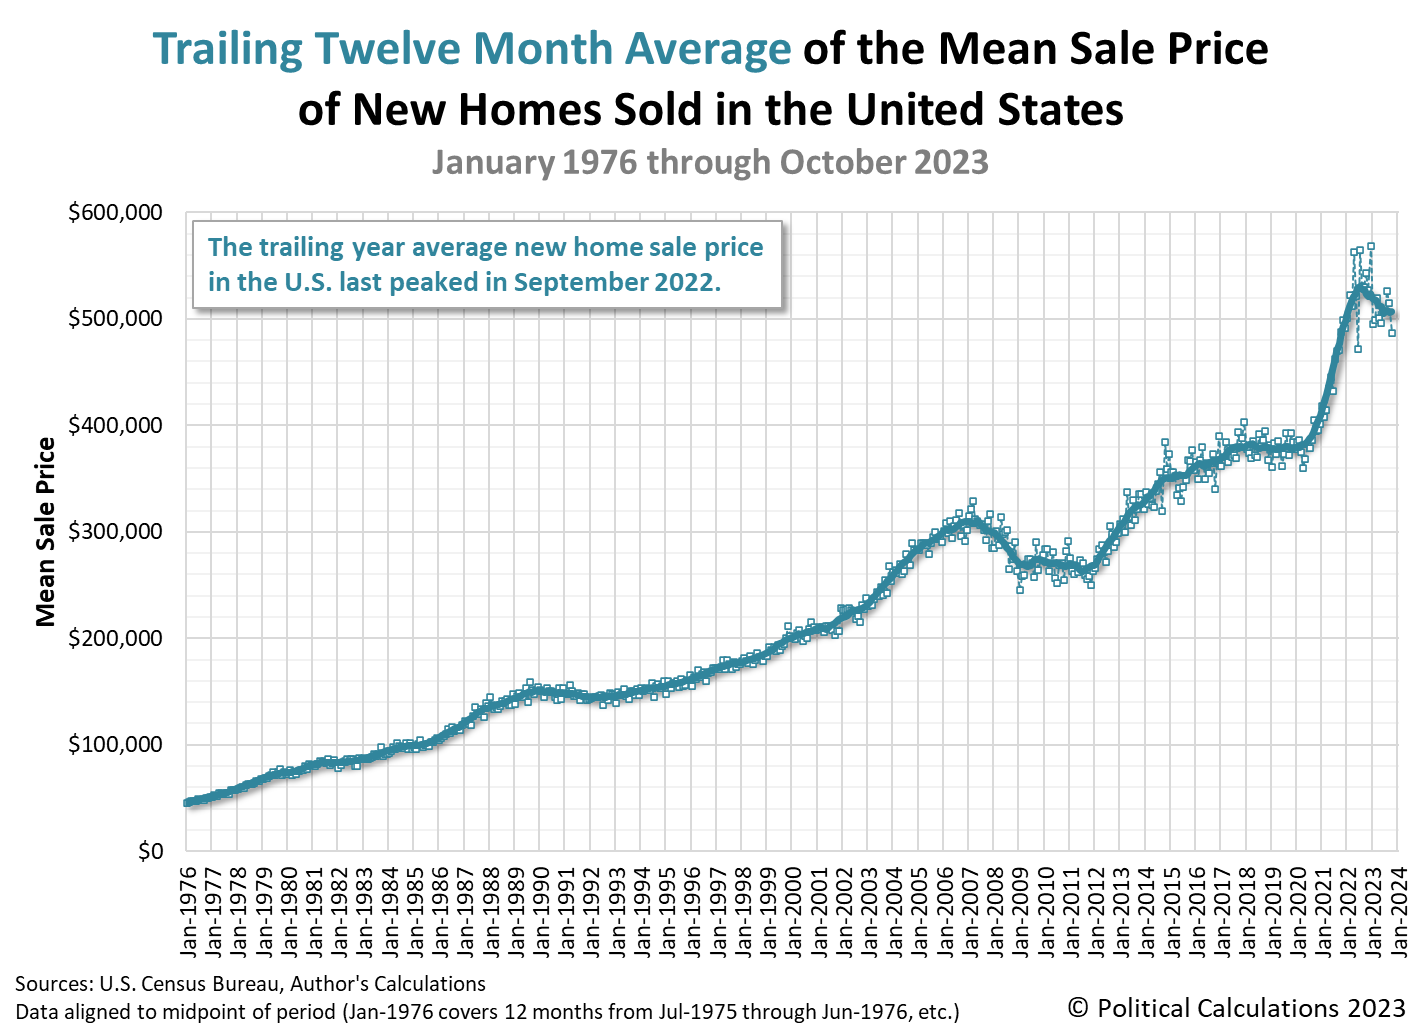 Trailing Twelve Month Average of the Mean Sale Price of New Homes Sold in the U.S., January 1976 - October 2023